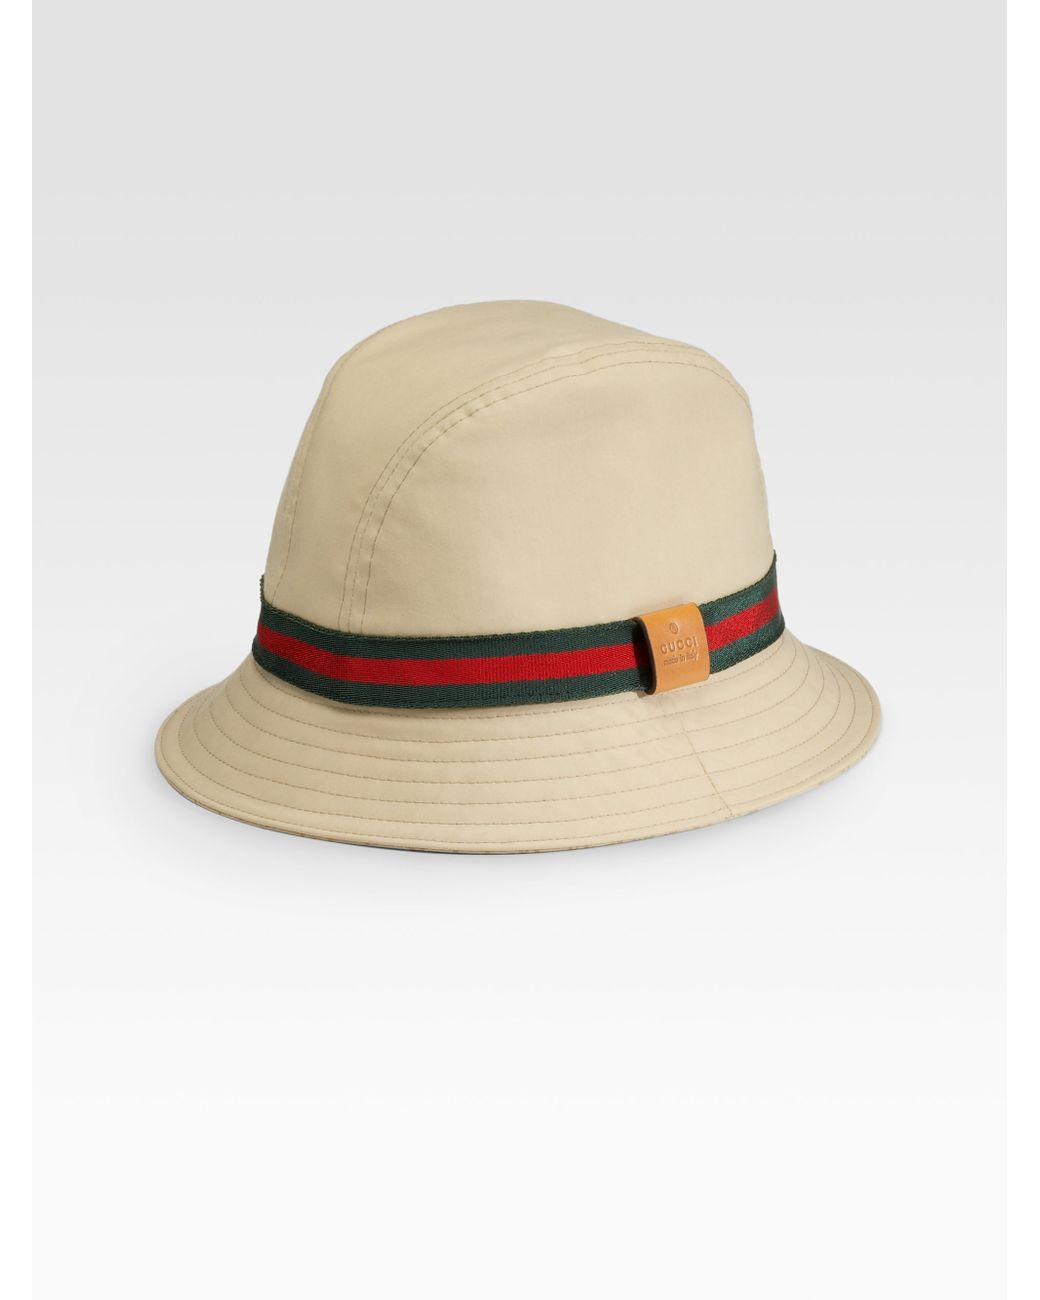 Gucci GG canvas bucket hat  Hats for men, Gucci accessories